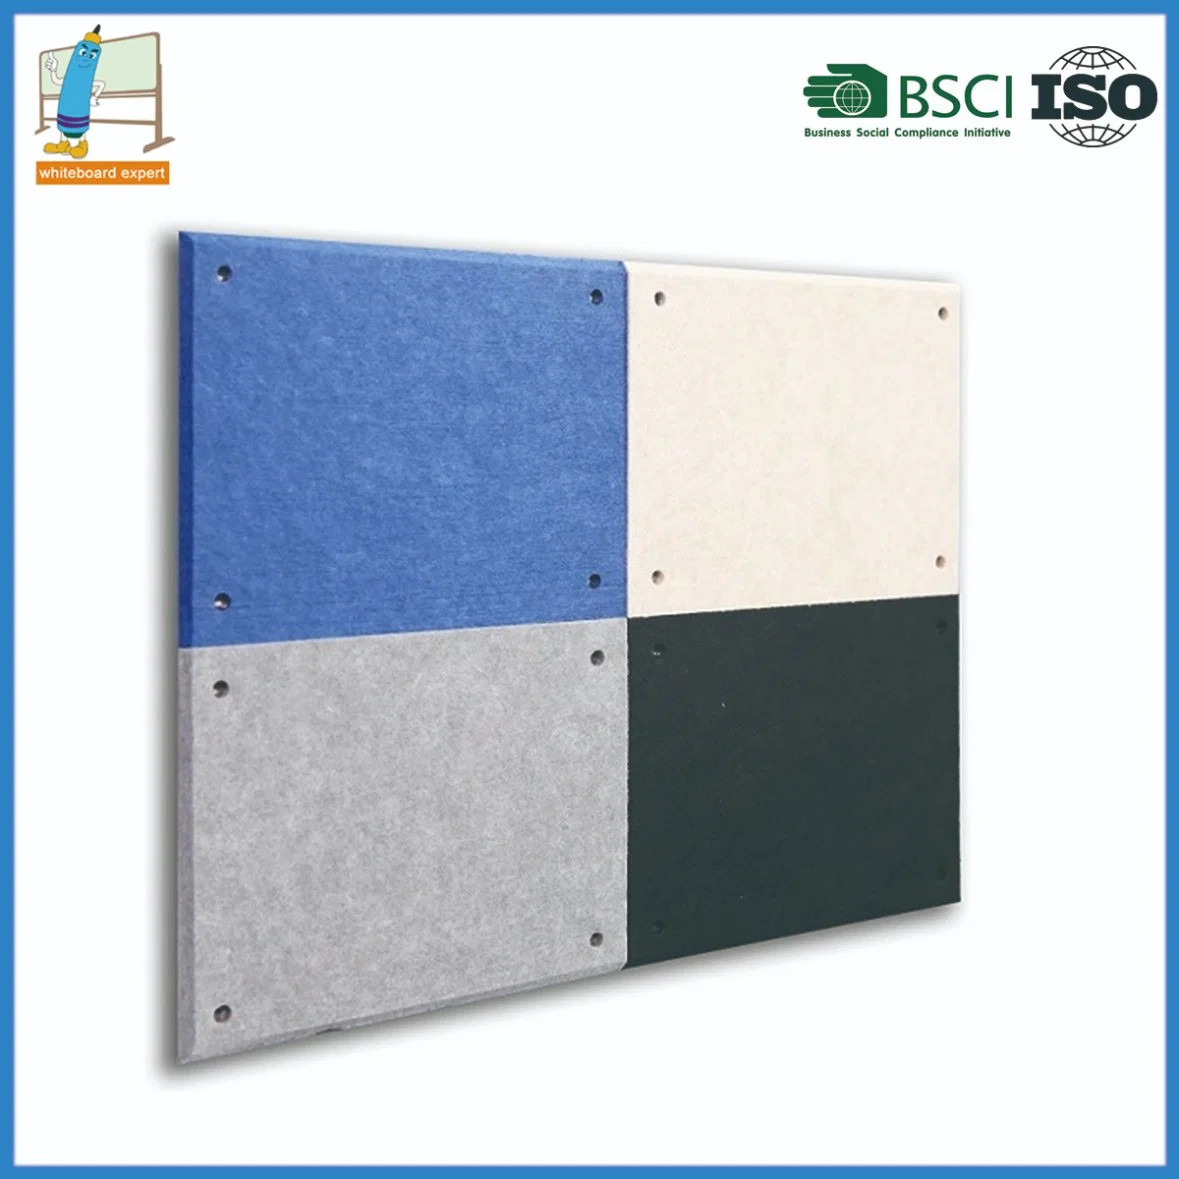 Frameless Notice Board Felt Board with Push Pins Wall Mounted Bulletin Board for Classroom Office Display